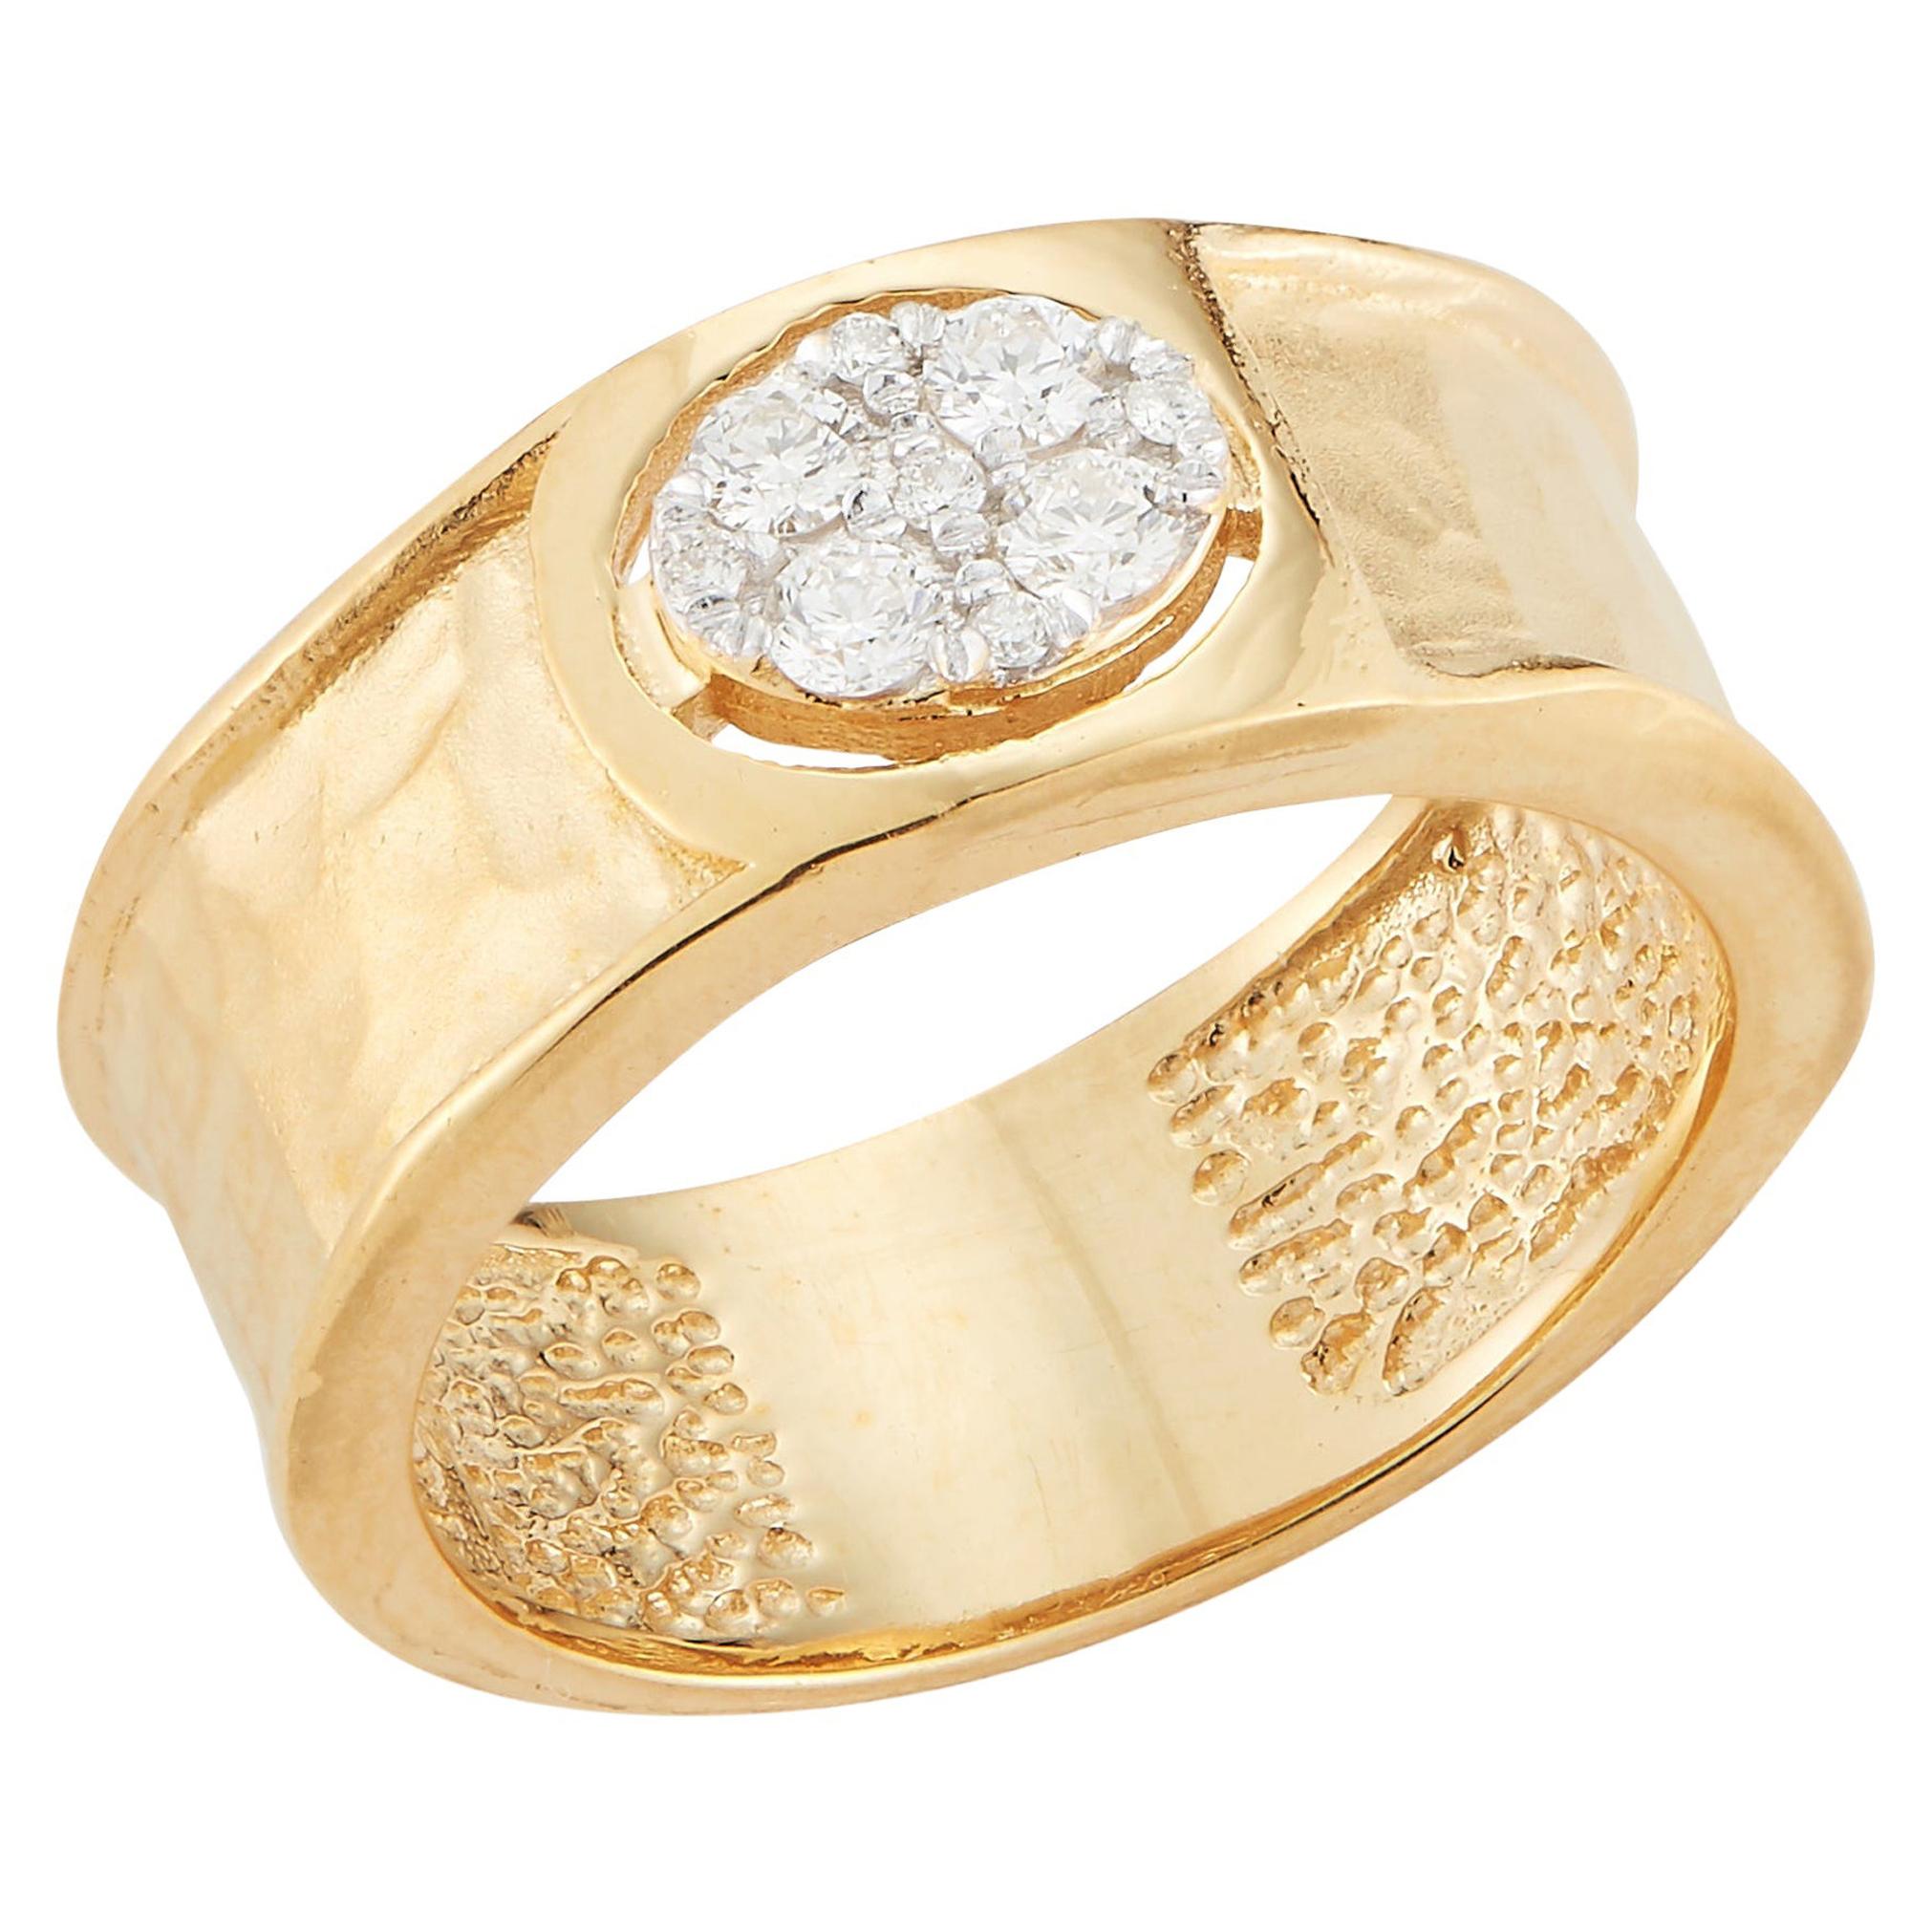 Handcrafted 14 Karat Yellow Gold Hammered Ring with an Oval Diamond Motif